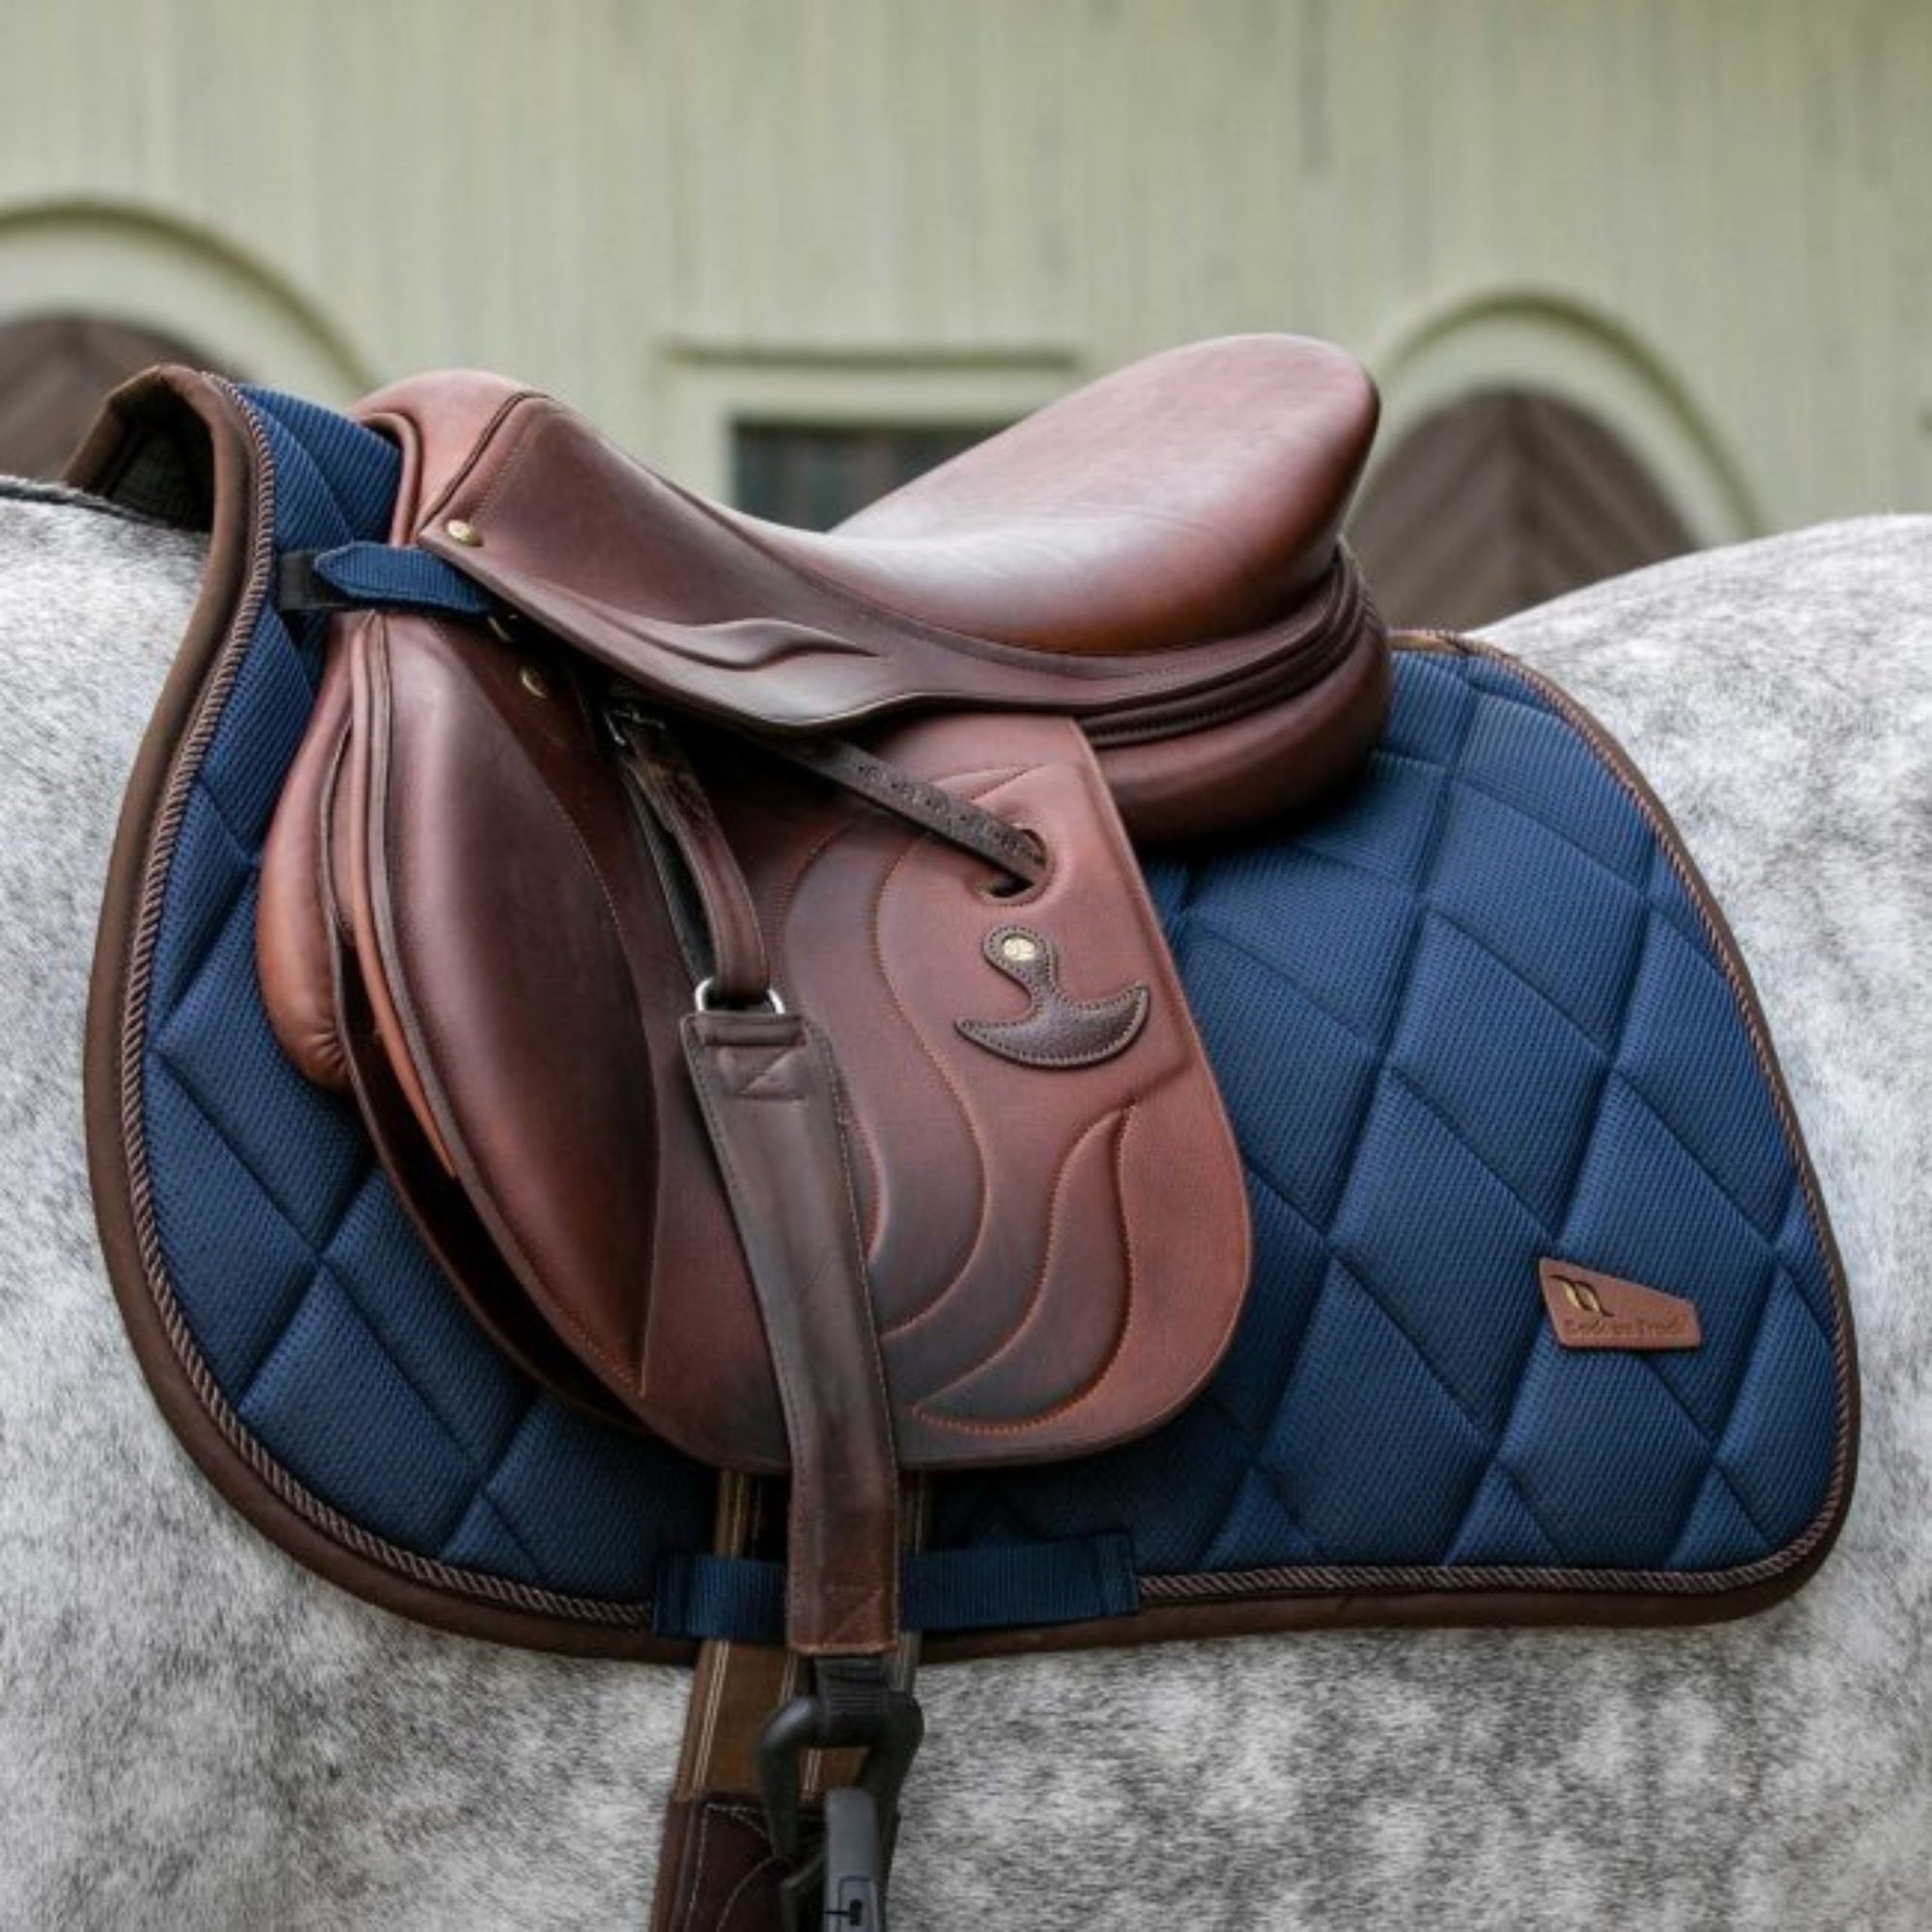 Navy saddle pad with brown accents, with saddle. 